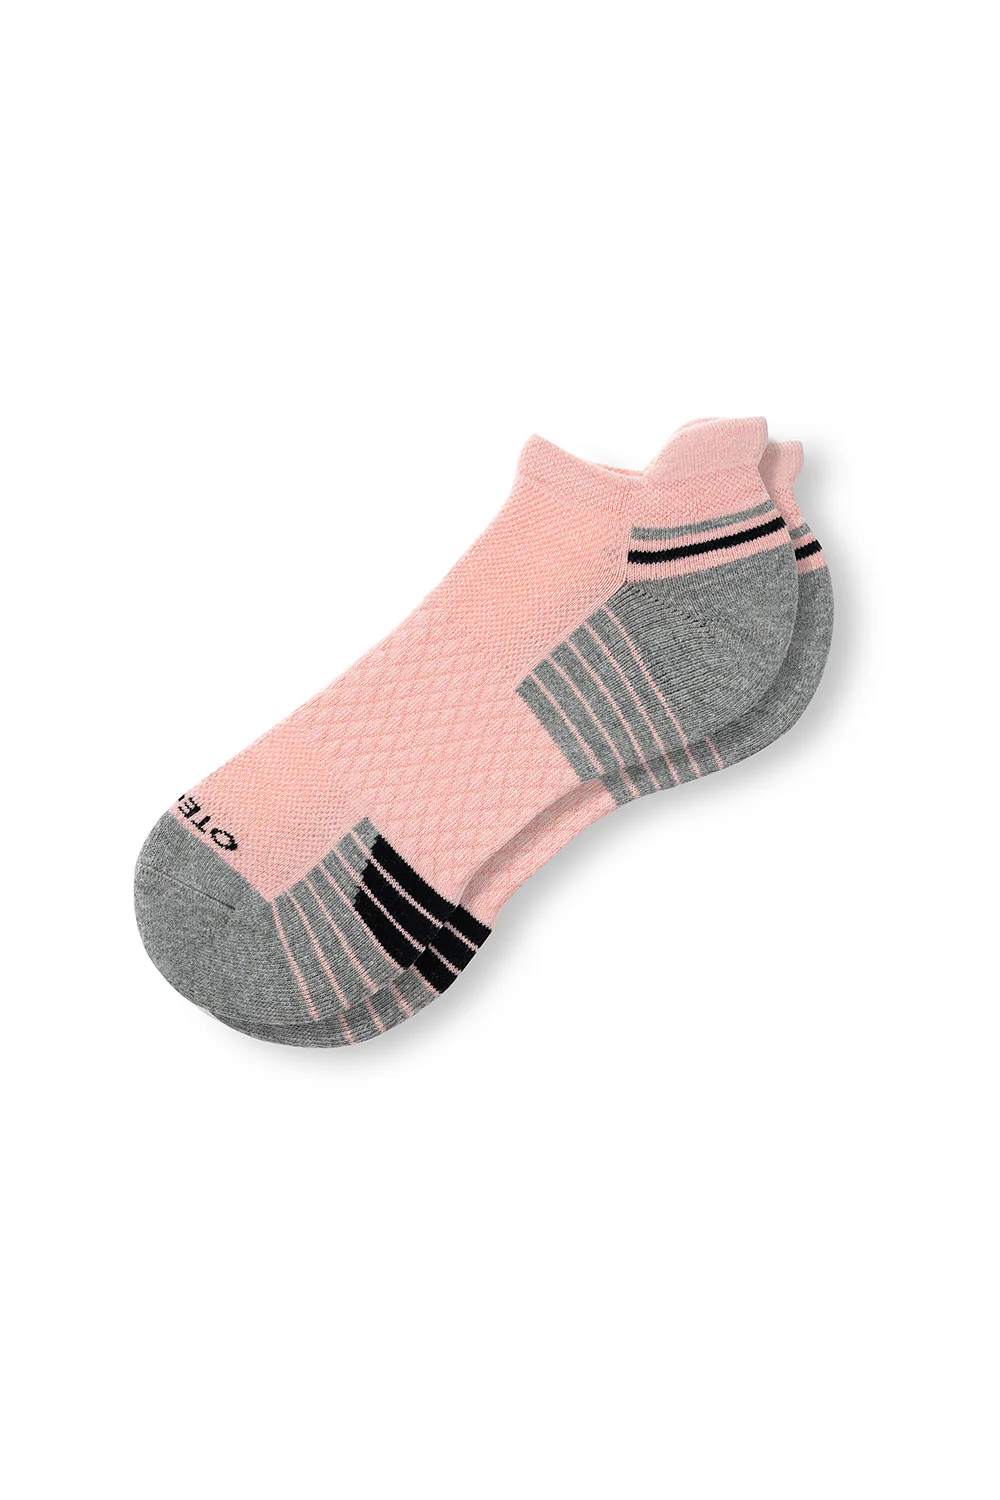 Quality You Can Feel: The Superior Craftsmanship of Otecka Women's Ankle Socks